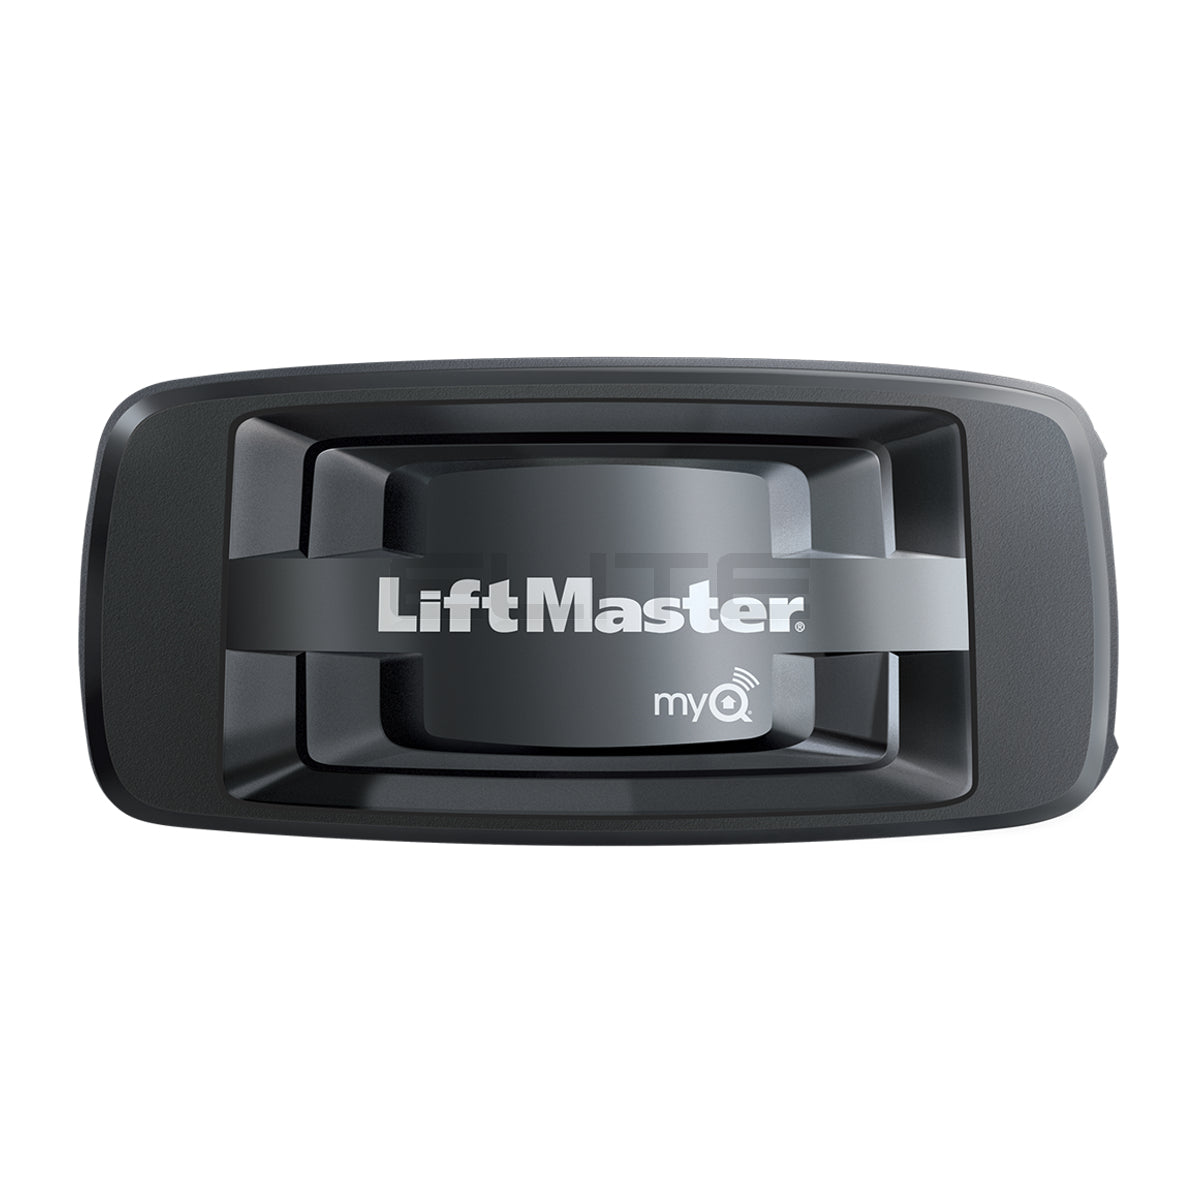 Liftmaster 828lm Smartphone Controller (front view)